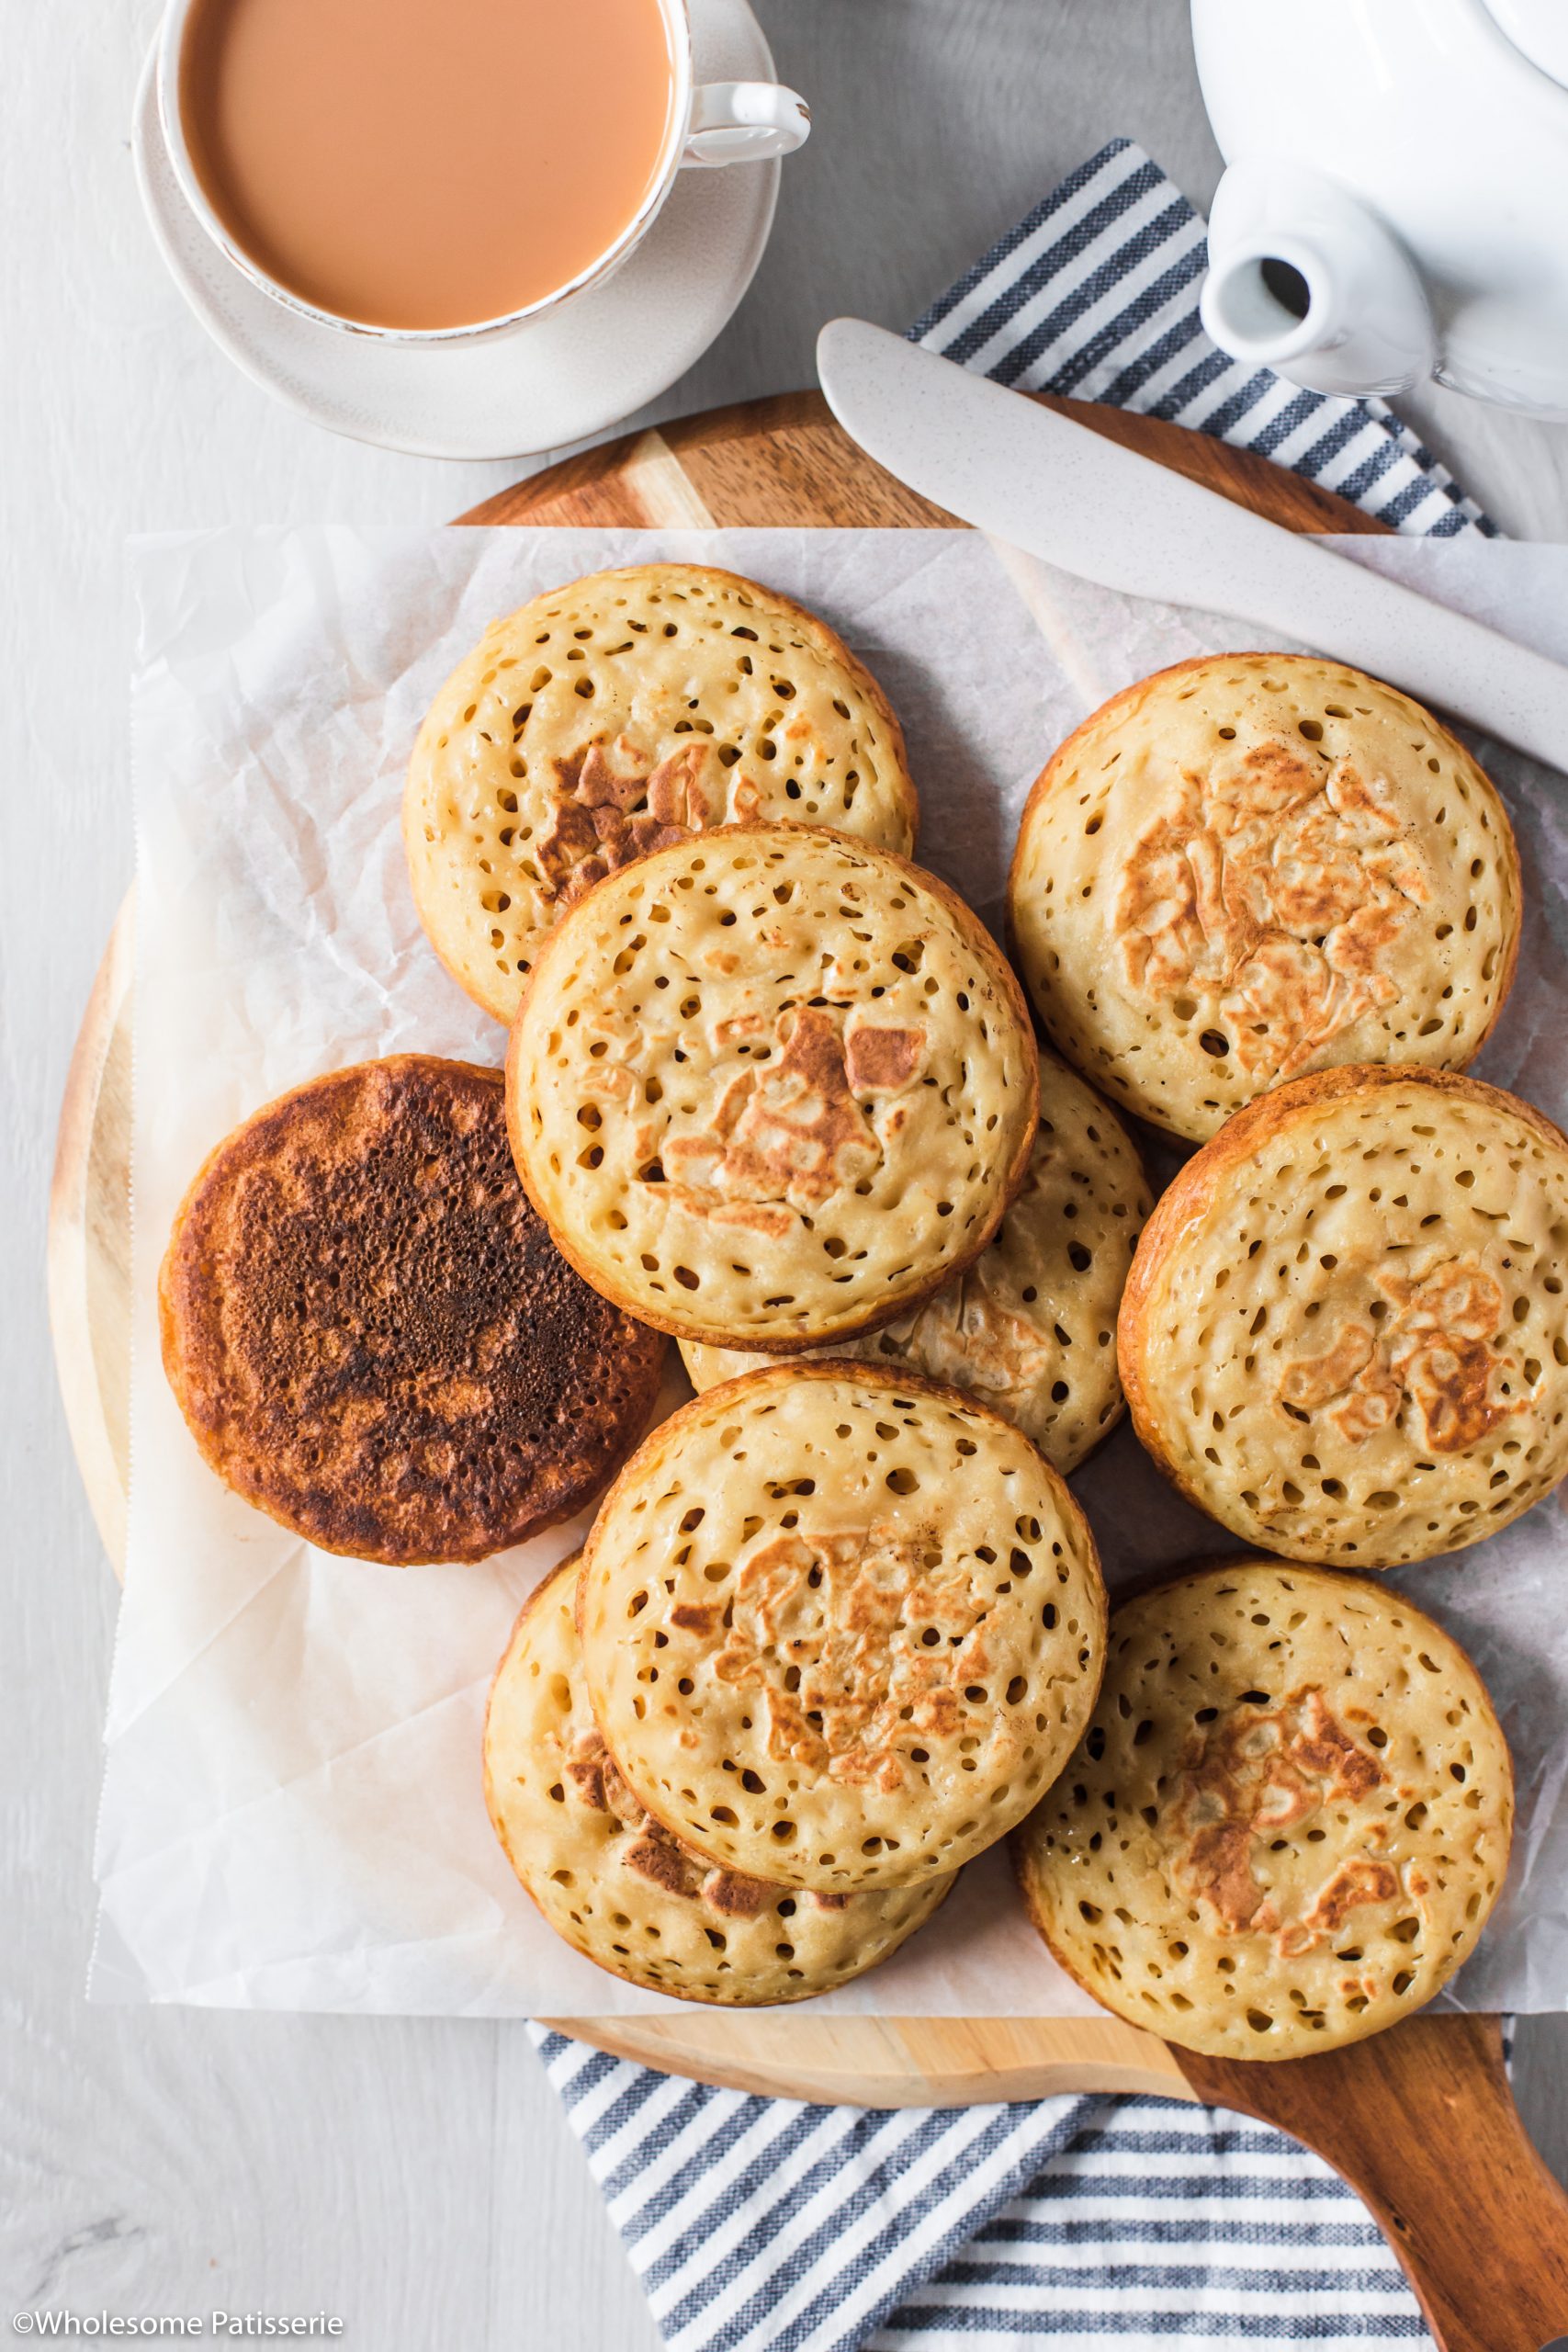 Preparing the crumpets for serving.